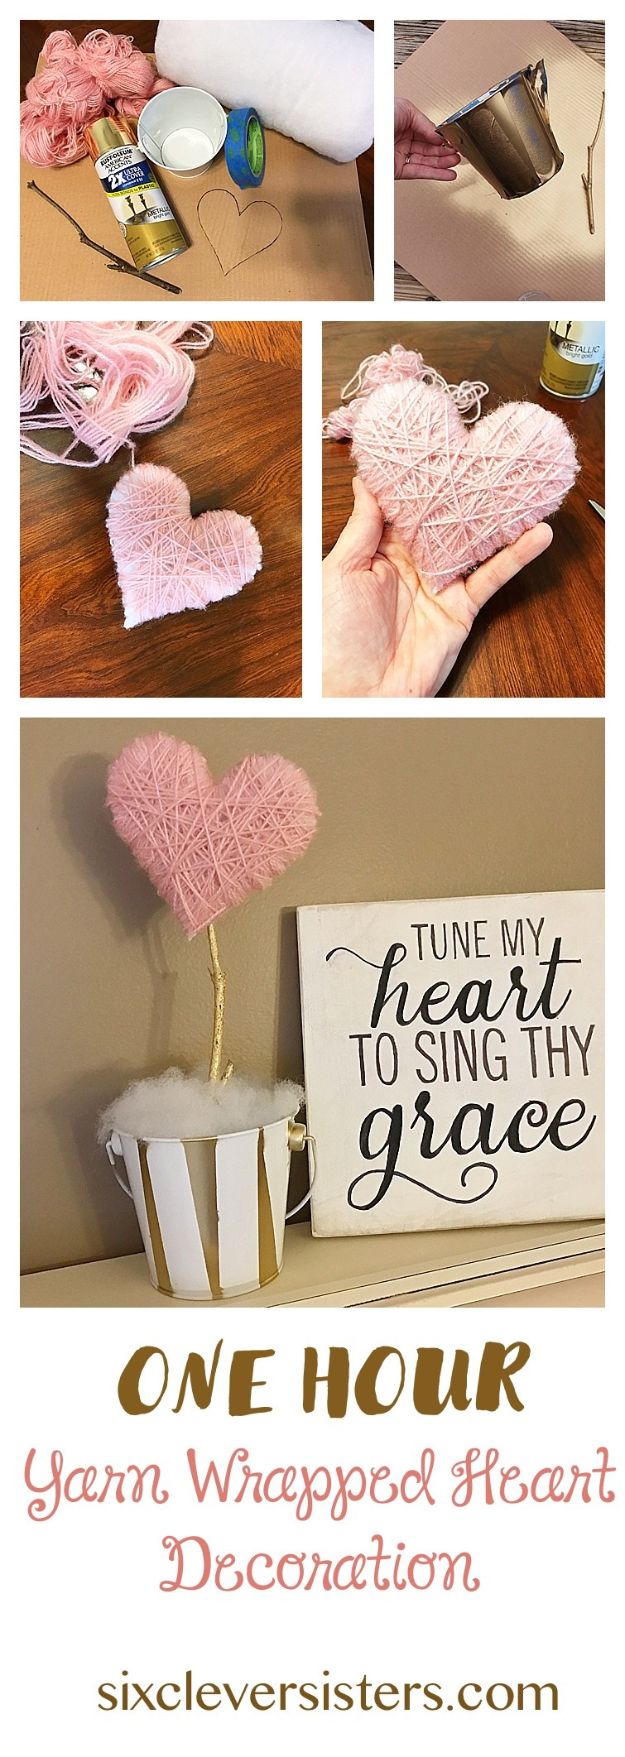 Crafts To Make and Sell - Yarn Wrapped Heart - 75 MORE Easy DIY Ideas for Cheap Things To Sell on Etsy, Online and for Craft Fairs. Make Money with crafts to sell ideas #crafts